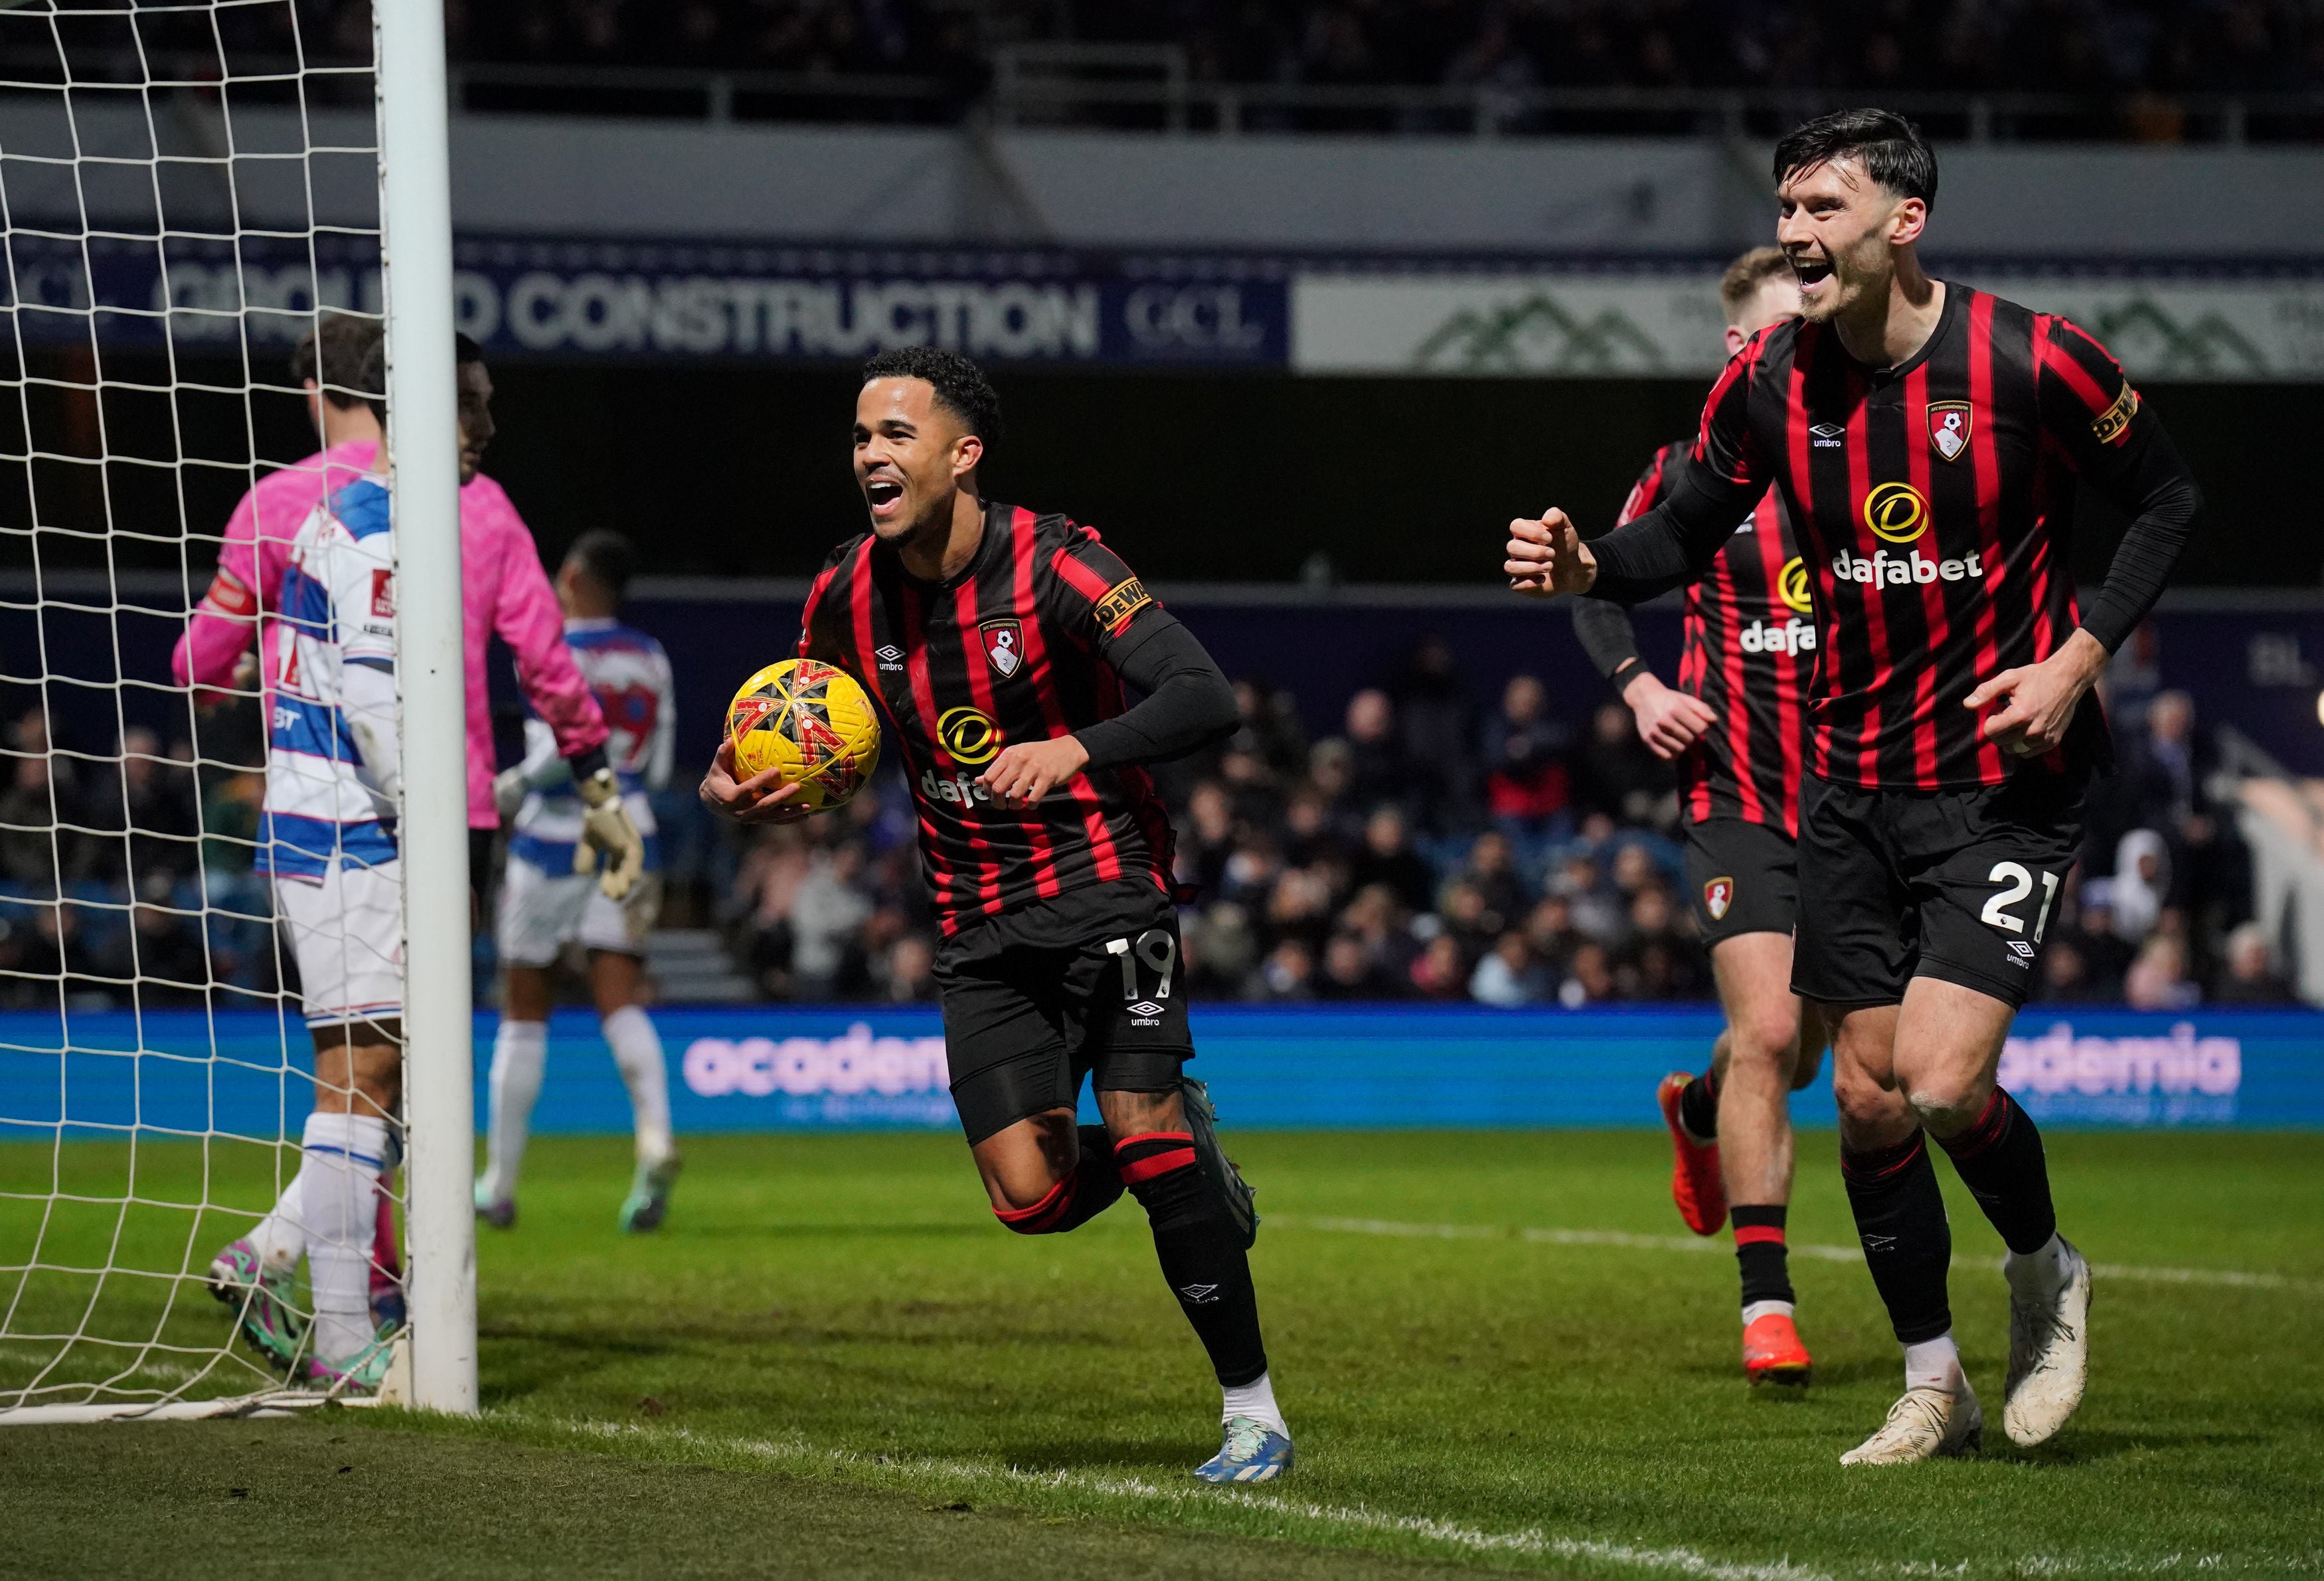 Bournemouth fought from 2-0 down to edge QPR 3-2